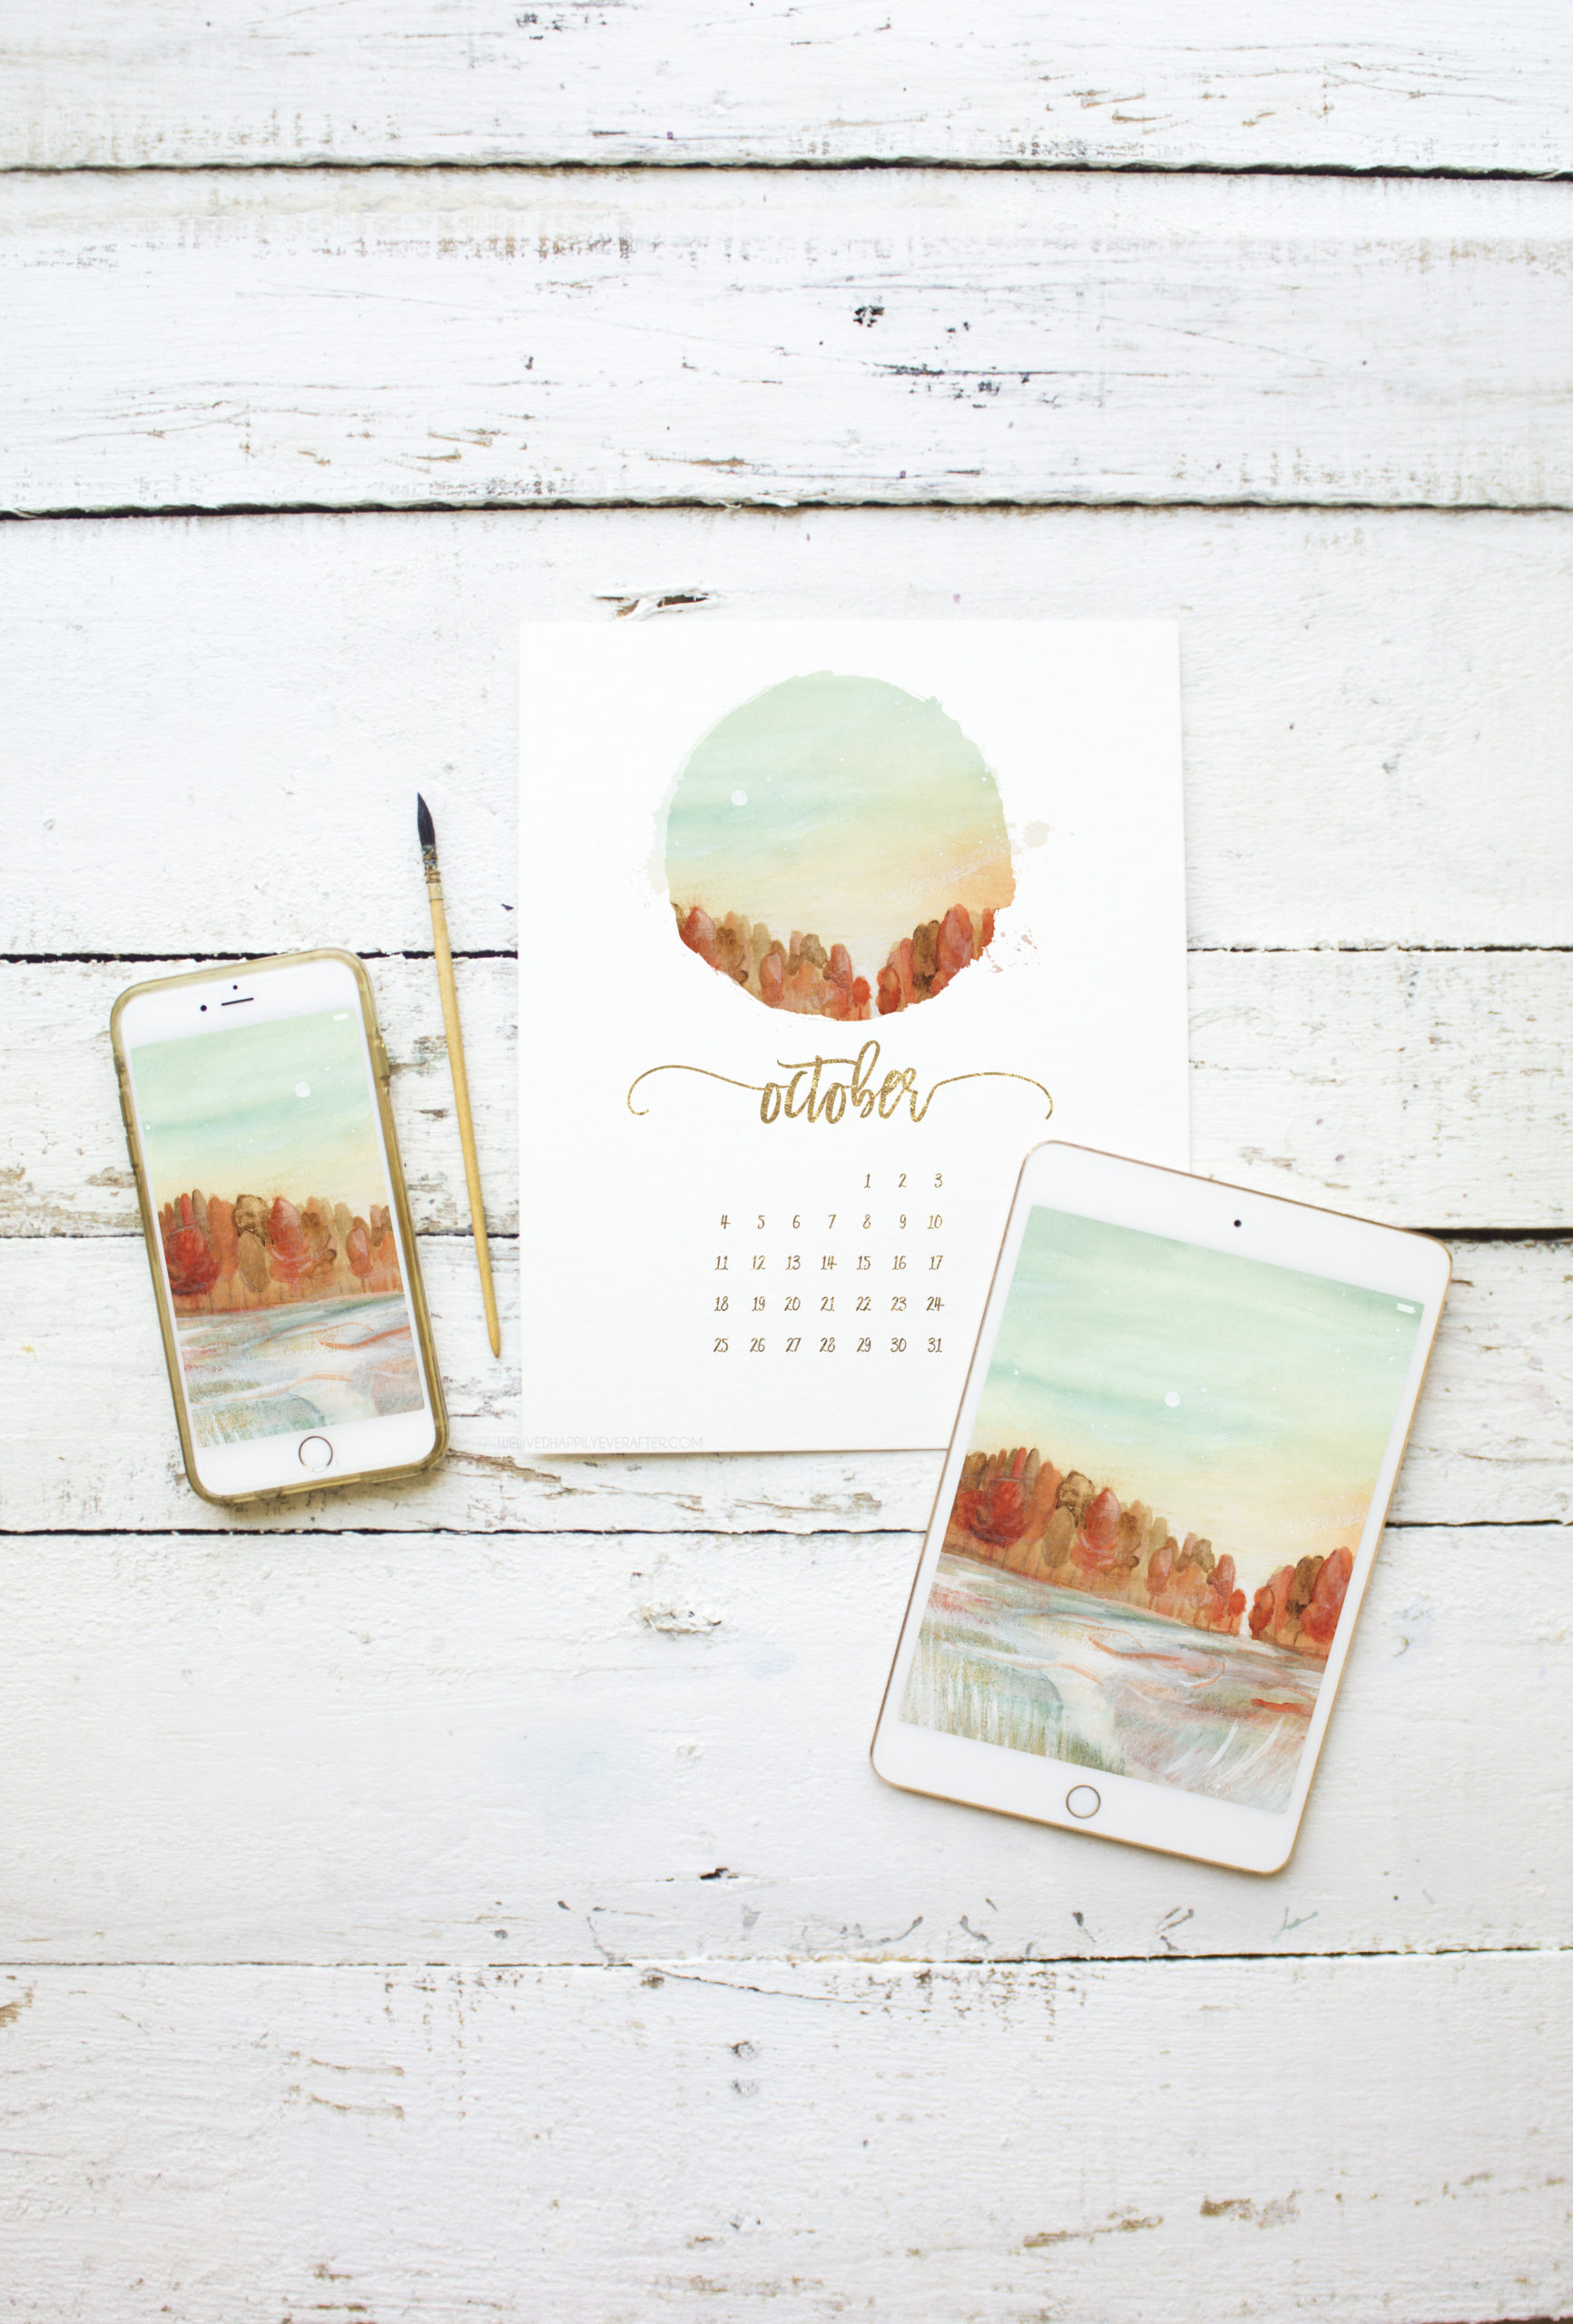 Colorful Fall Trees & Autumn Breezy Sunset Watercolor Painting - Free Printable Calendar